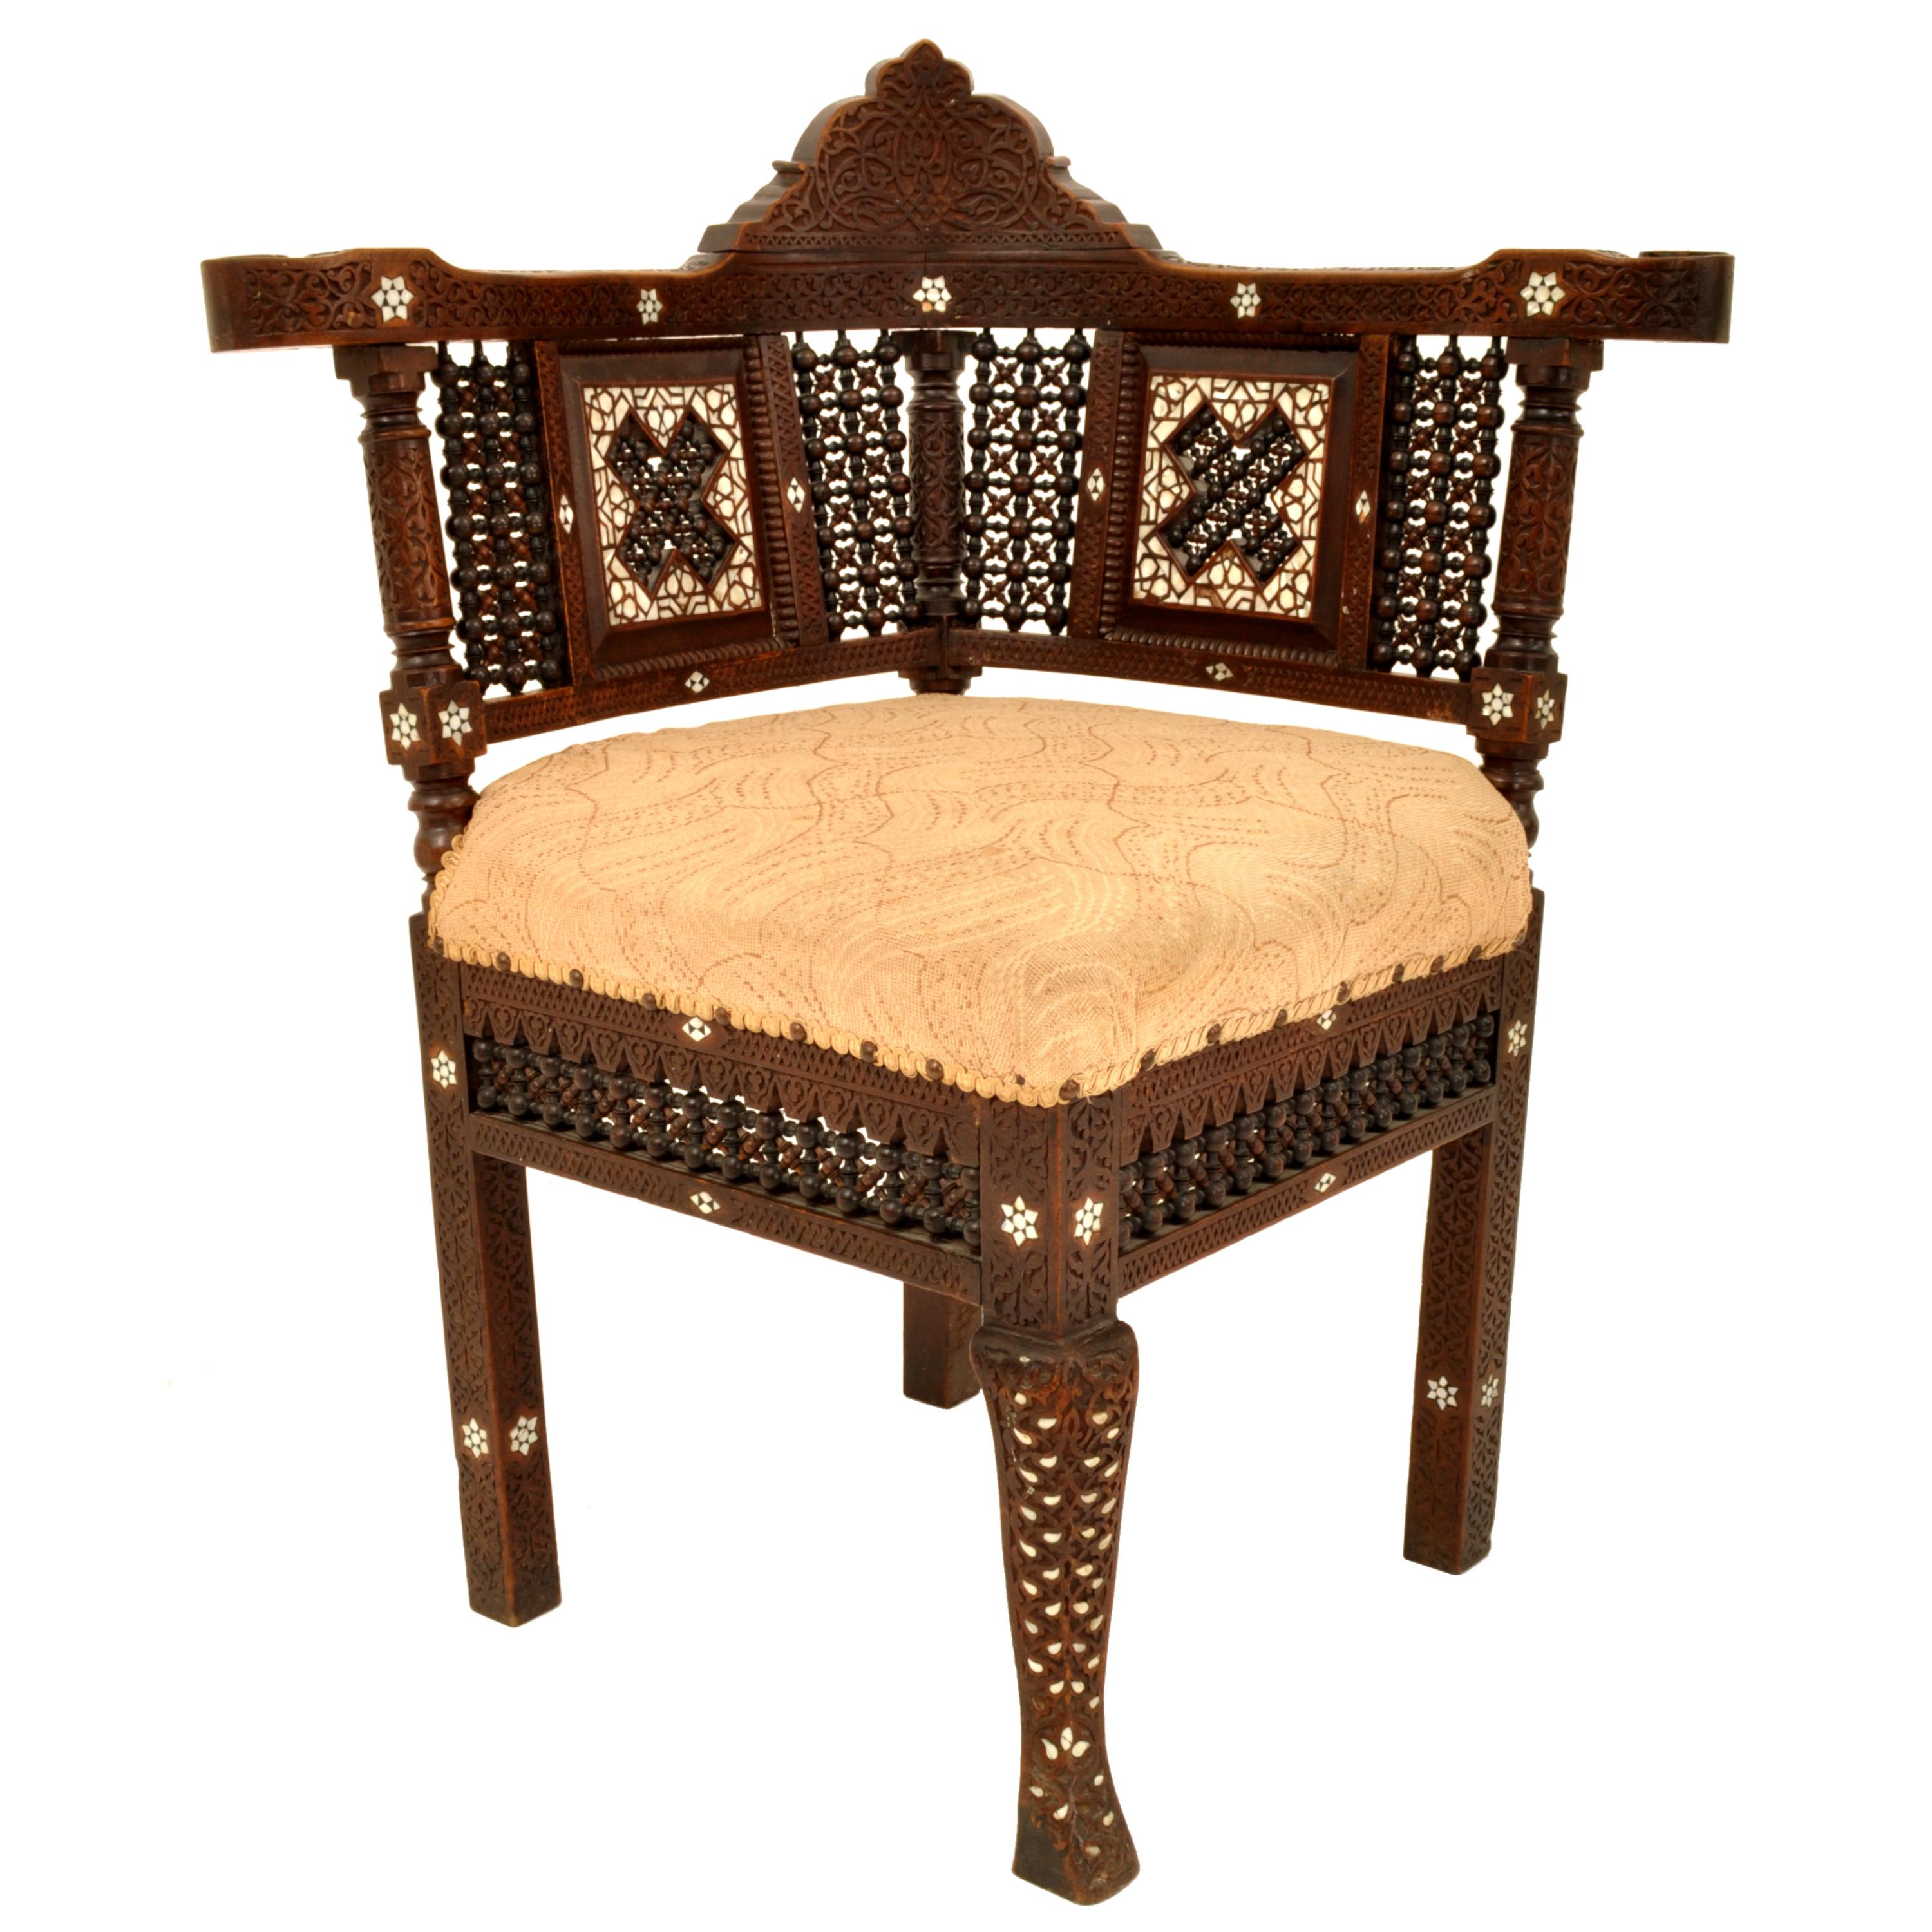 Late 19th Century Antique Islamic Moorish Syrian Carved Inlaid Mother of Pearl Corner Chair 1880 For Sale